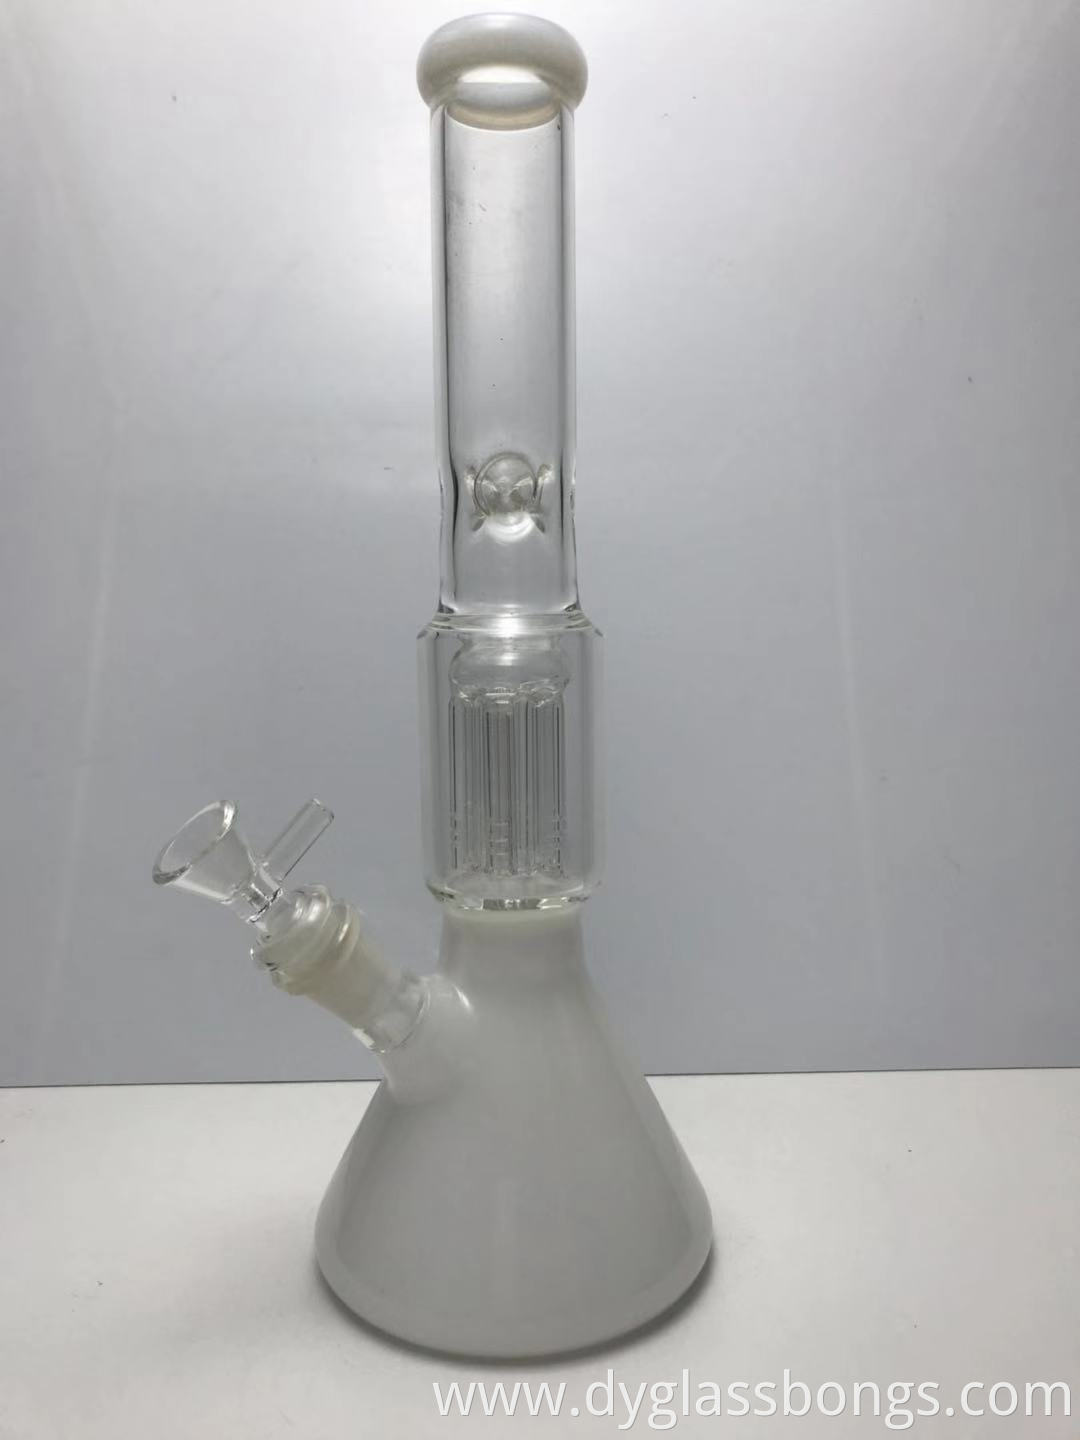 Recycle Oil Gigs Glass Bongs